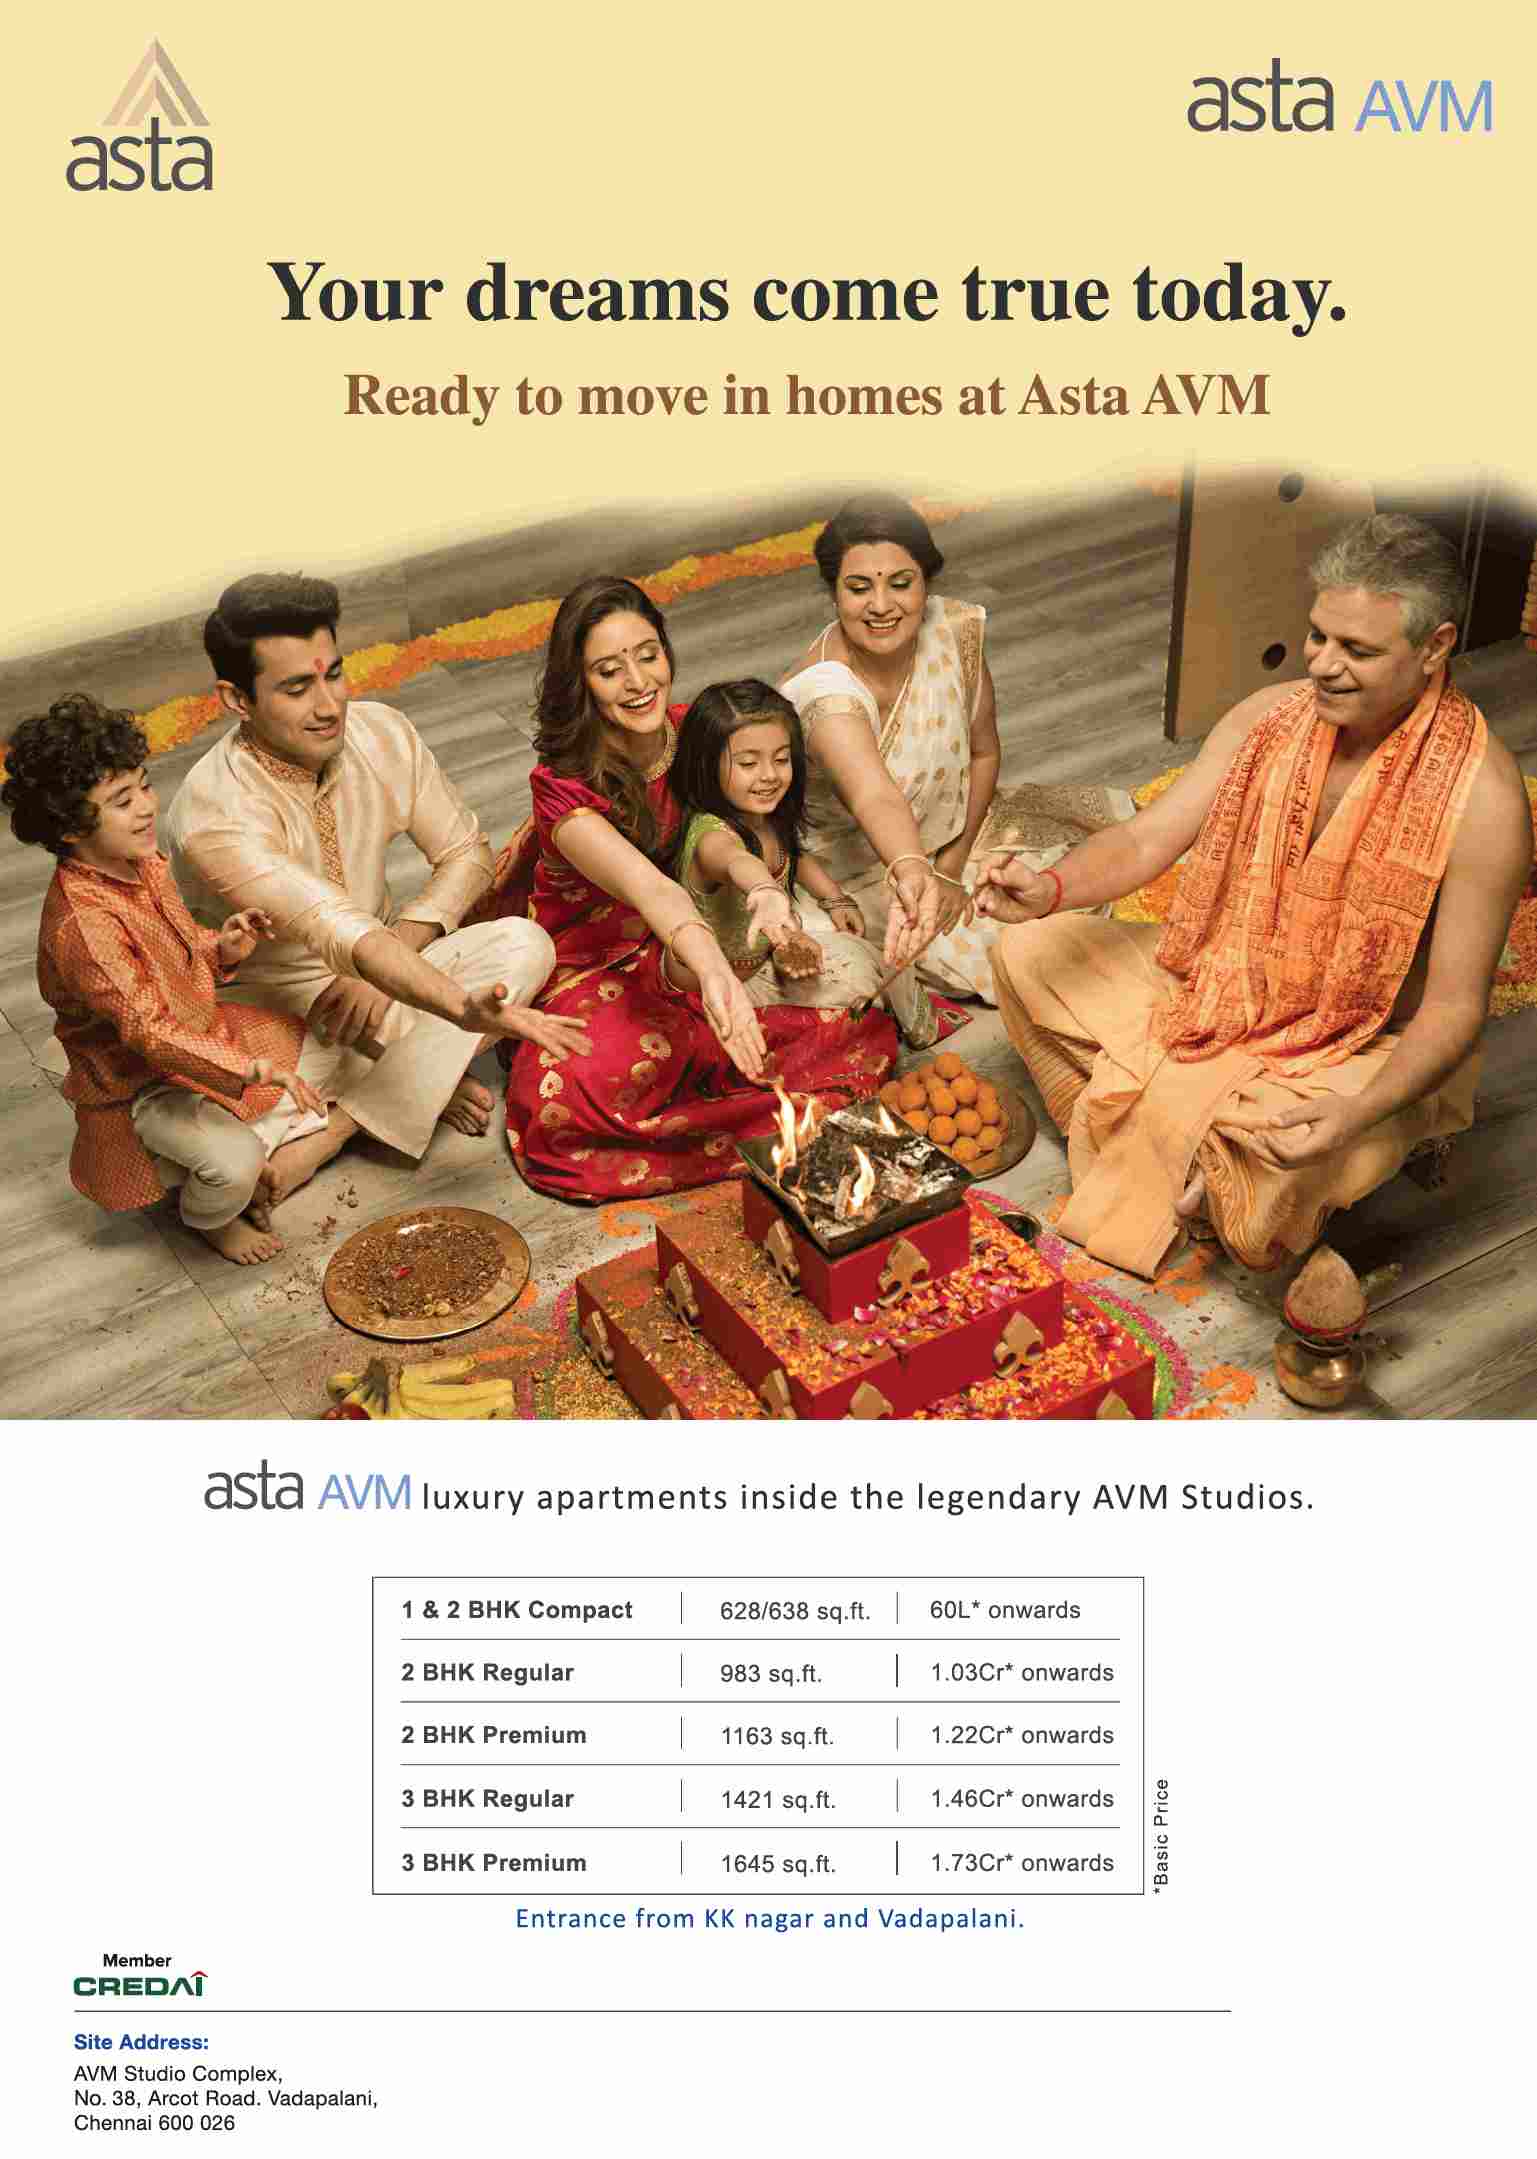 Book ready to move in homes at Asta Avm in Chennai Update